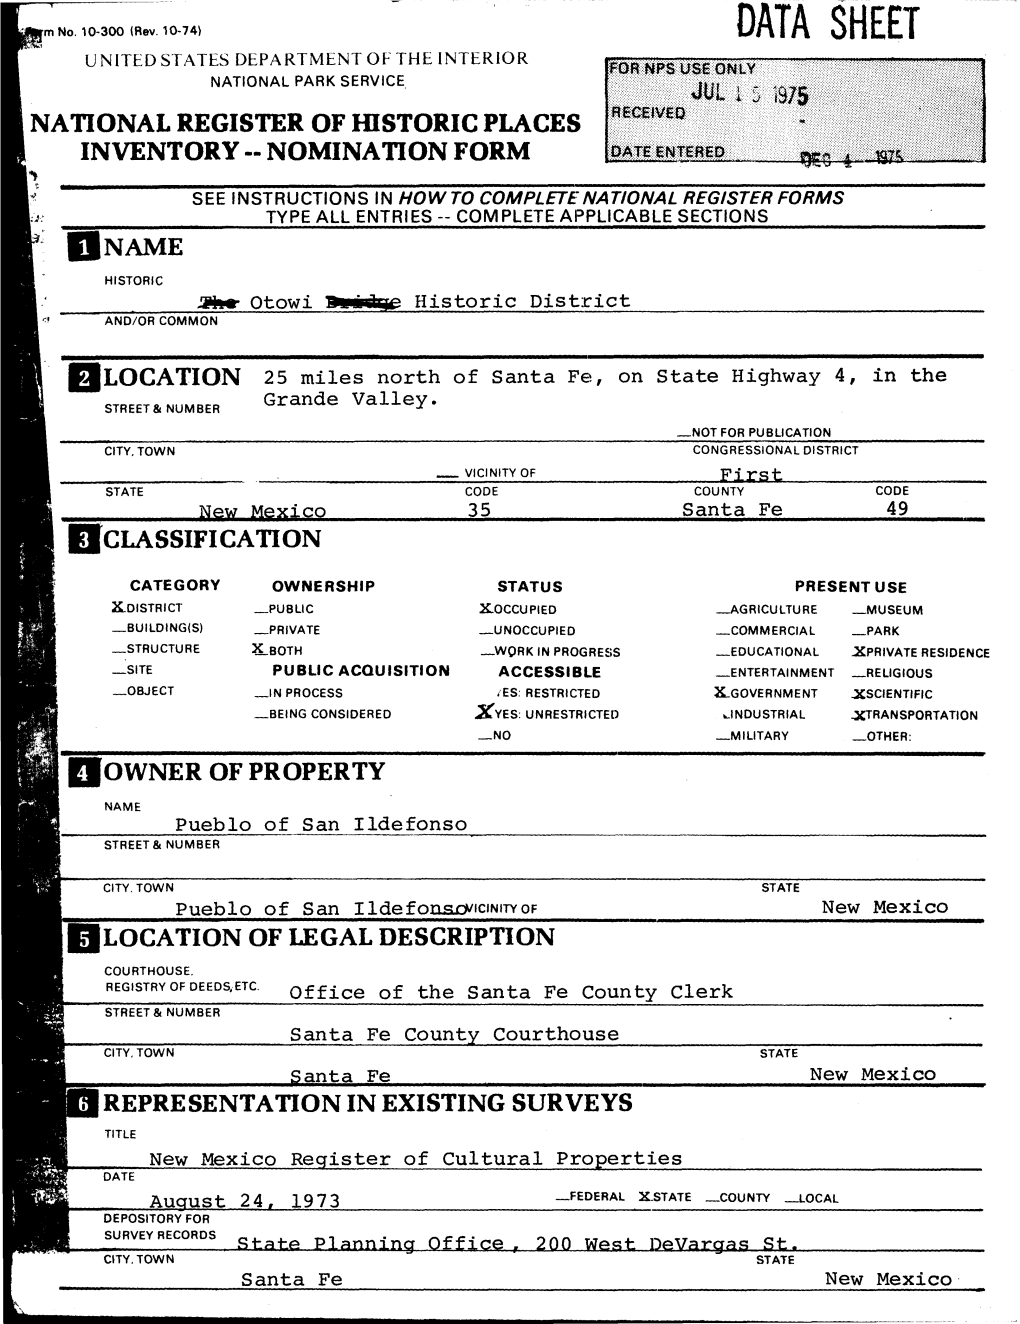 Data Sheet United States Department of the Interior National Park Service National Register of Historic Places Inventory - Nomination Form